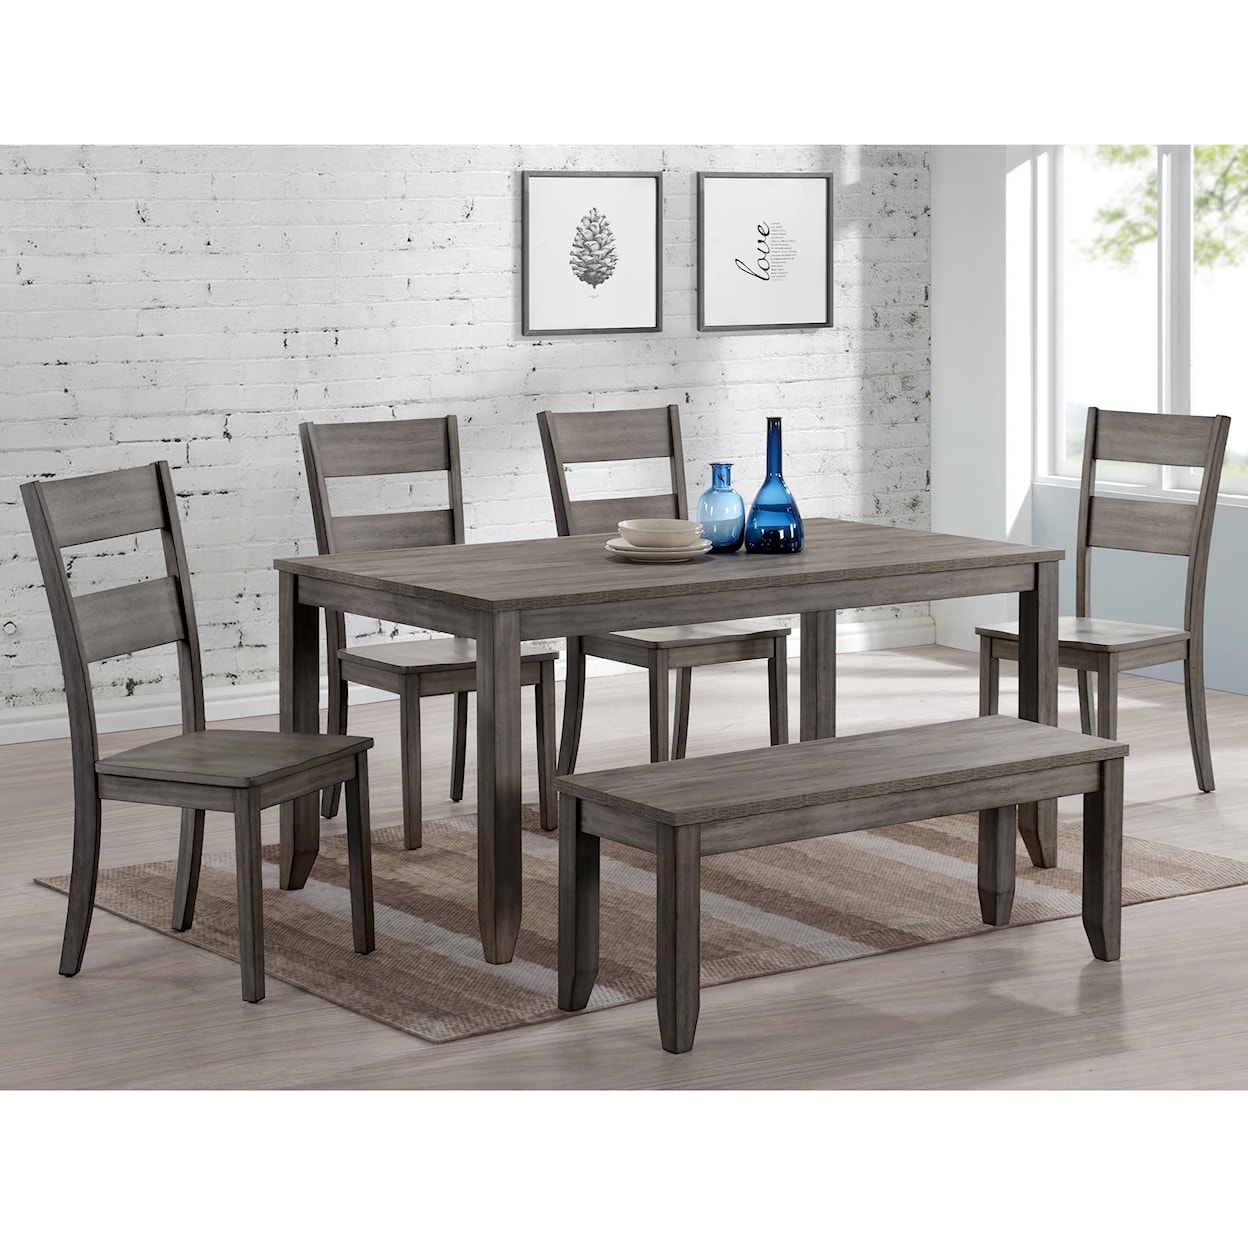 CM Sean 6 Piece Dining Set with Bench